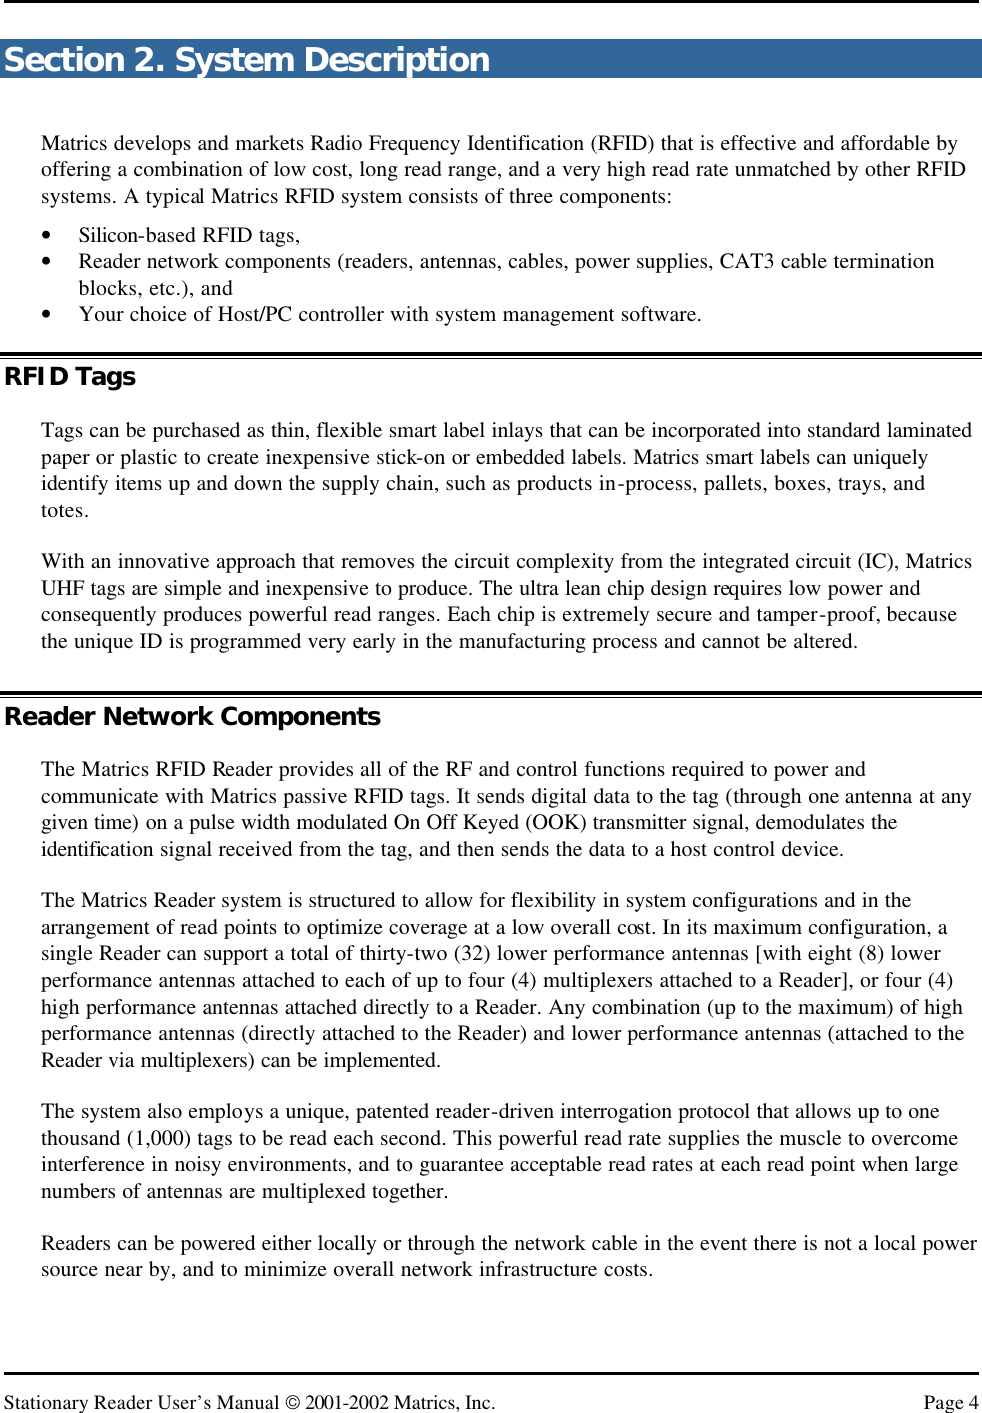   Stationary Reader User’s Manual  2001-2002 Matrics, Inc. Page 4 Section 2. System Description Matrics develops and markets Radio Frequency Identification (RFID) that is effective and affordable by offering a combination of low cost, long read range, and a very high read rate unmatched by other RFID systems. A typical Matrics RFID system consists of three components:  • Silicon-based RFID tags, • Reader network components (readers, antennas, cables, power supplies, CAT3 cable termination blocks, etc.), and • Your choice of Host/PC controller with system management software. RFID Tags Tags can be purchased as thin, flexible smart label inlays that can be incorporated into standard laminated paper or plastic to create inexpensive stick-on or embedded labels. Matrics smart labels can uniquely identify items up and down the supply chain, such as products in-process, pallets, boxes, trays, and totes. With an innovative approach that removes the circuit complexity from the integrated circuit (IC), Matrics UHF tags are simple and inexpensive to produce. The ultra lean chip design requires low power and consequently produces powerful read ranges. Each chip is extremely secure and tamper-proof, because the unique ID is programmed very early in the manufacturing process and cannot be altered. Reader Network Components The Matrics RFID Reader provides all of the RF and control functions required to power and communicate with Matrics passive RFID tags. It sends digital data to the tag (through one antenna at any given time) on a pulse width modulated On Off Keyed (OOK) transmitter signal, demodulates the identification signal received from the tag, and then sends the data to a host control device.  The Matrics Reader system is structured to allow for flexibility in system configurations and in the arrangement of read points to optimize coverage at a low overall cost. In its maximum configuration, a single Reader can support a total of thirty-two (32) lower performance antennas [with eight (8) lower performance antennas attached to each of up to four (4) multiplexers attached to a Reader], or four (4) high performance antennas attached directly to a Reader. Any combination (up to the maximum) of high performance antennas (directly attached to the Reader) and lower performance antennas (attached to the Reader via multiplexers) can be implemented. The system also employs a unique, patented reader-driven interrogation protocol that allows up to one thousand (1,000) tags to be read each second. This powerful read rate supplies the muscle to overcome interference in noisy environments, and to guarantee acceptable read rates at each read point when large numbers of antennas are multiplexed together. Readers can be powered either locally or through the network cable in the event there is not a local power source near by, and to minimize overall network infrastructure costs. 